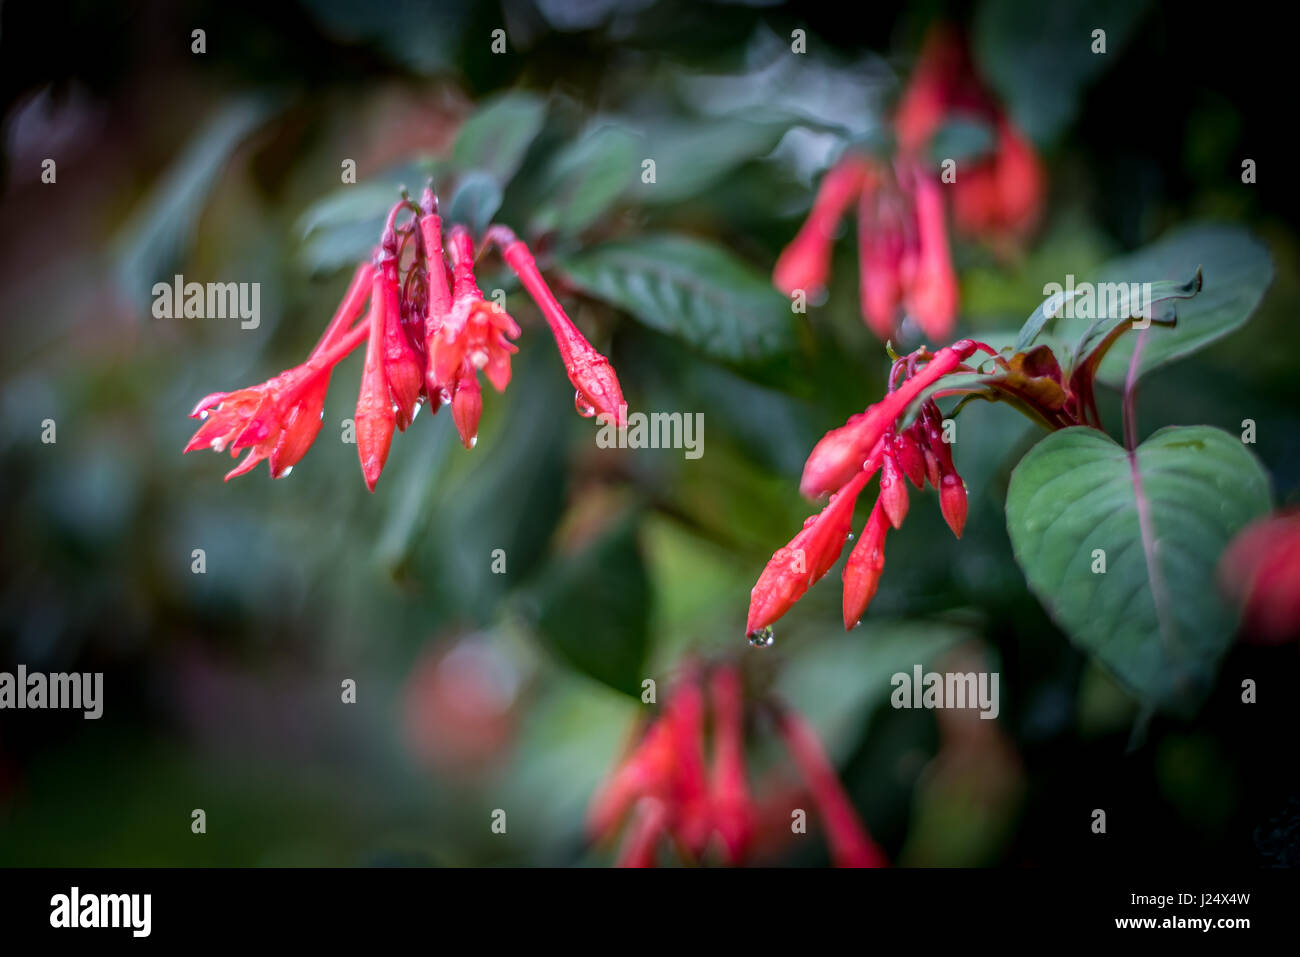 Rain drops on red blossoms of fuchsia thalia fuchsia, a variety of  triphylla thalia, with background dark green leaves in a spring garden in rain Stock Photo